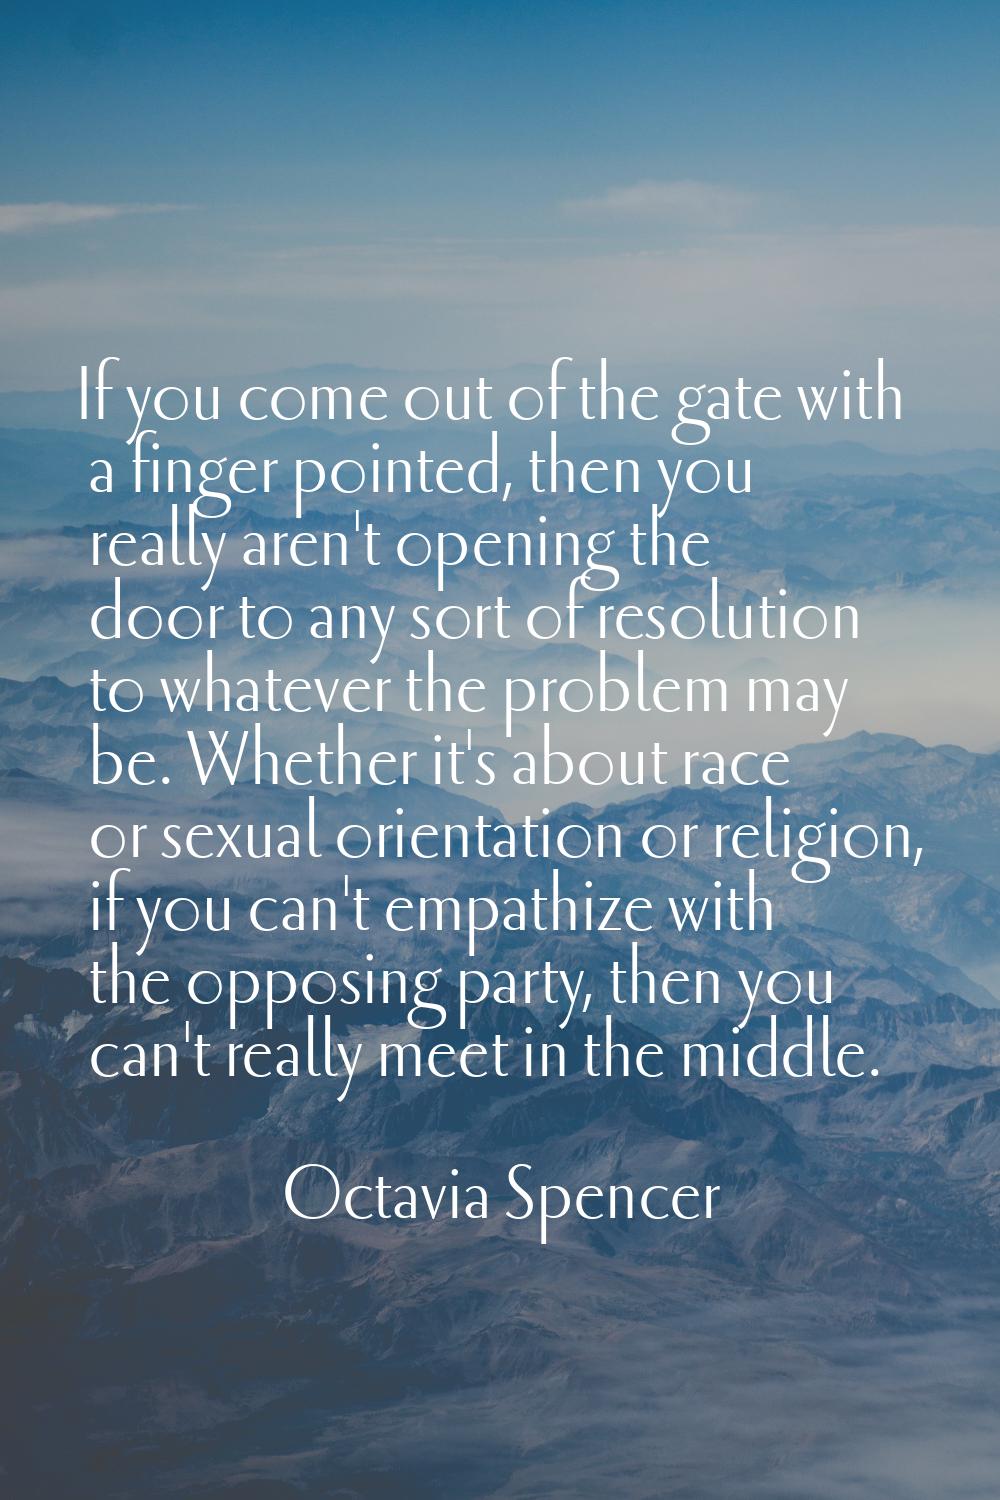 If you come out of the gate with a finger pointed, then you really aren't opening the door to any s